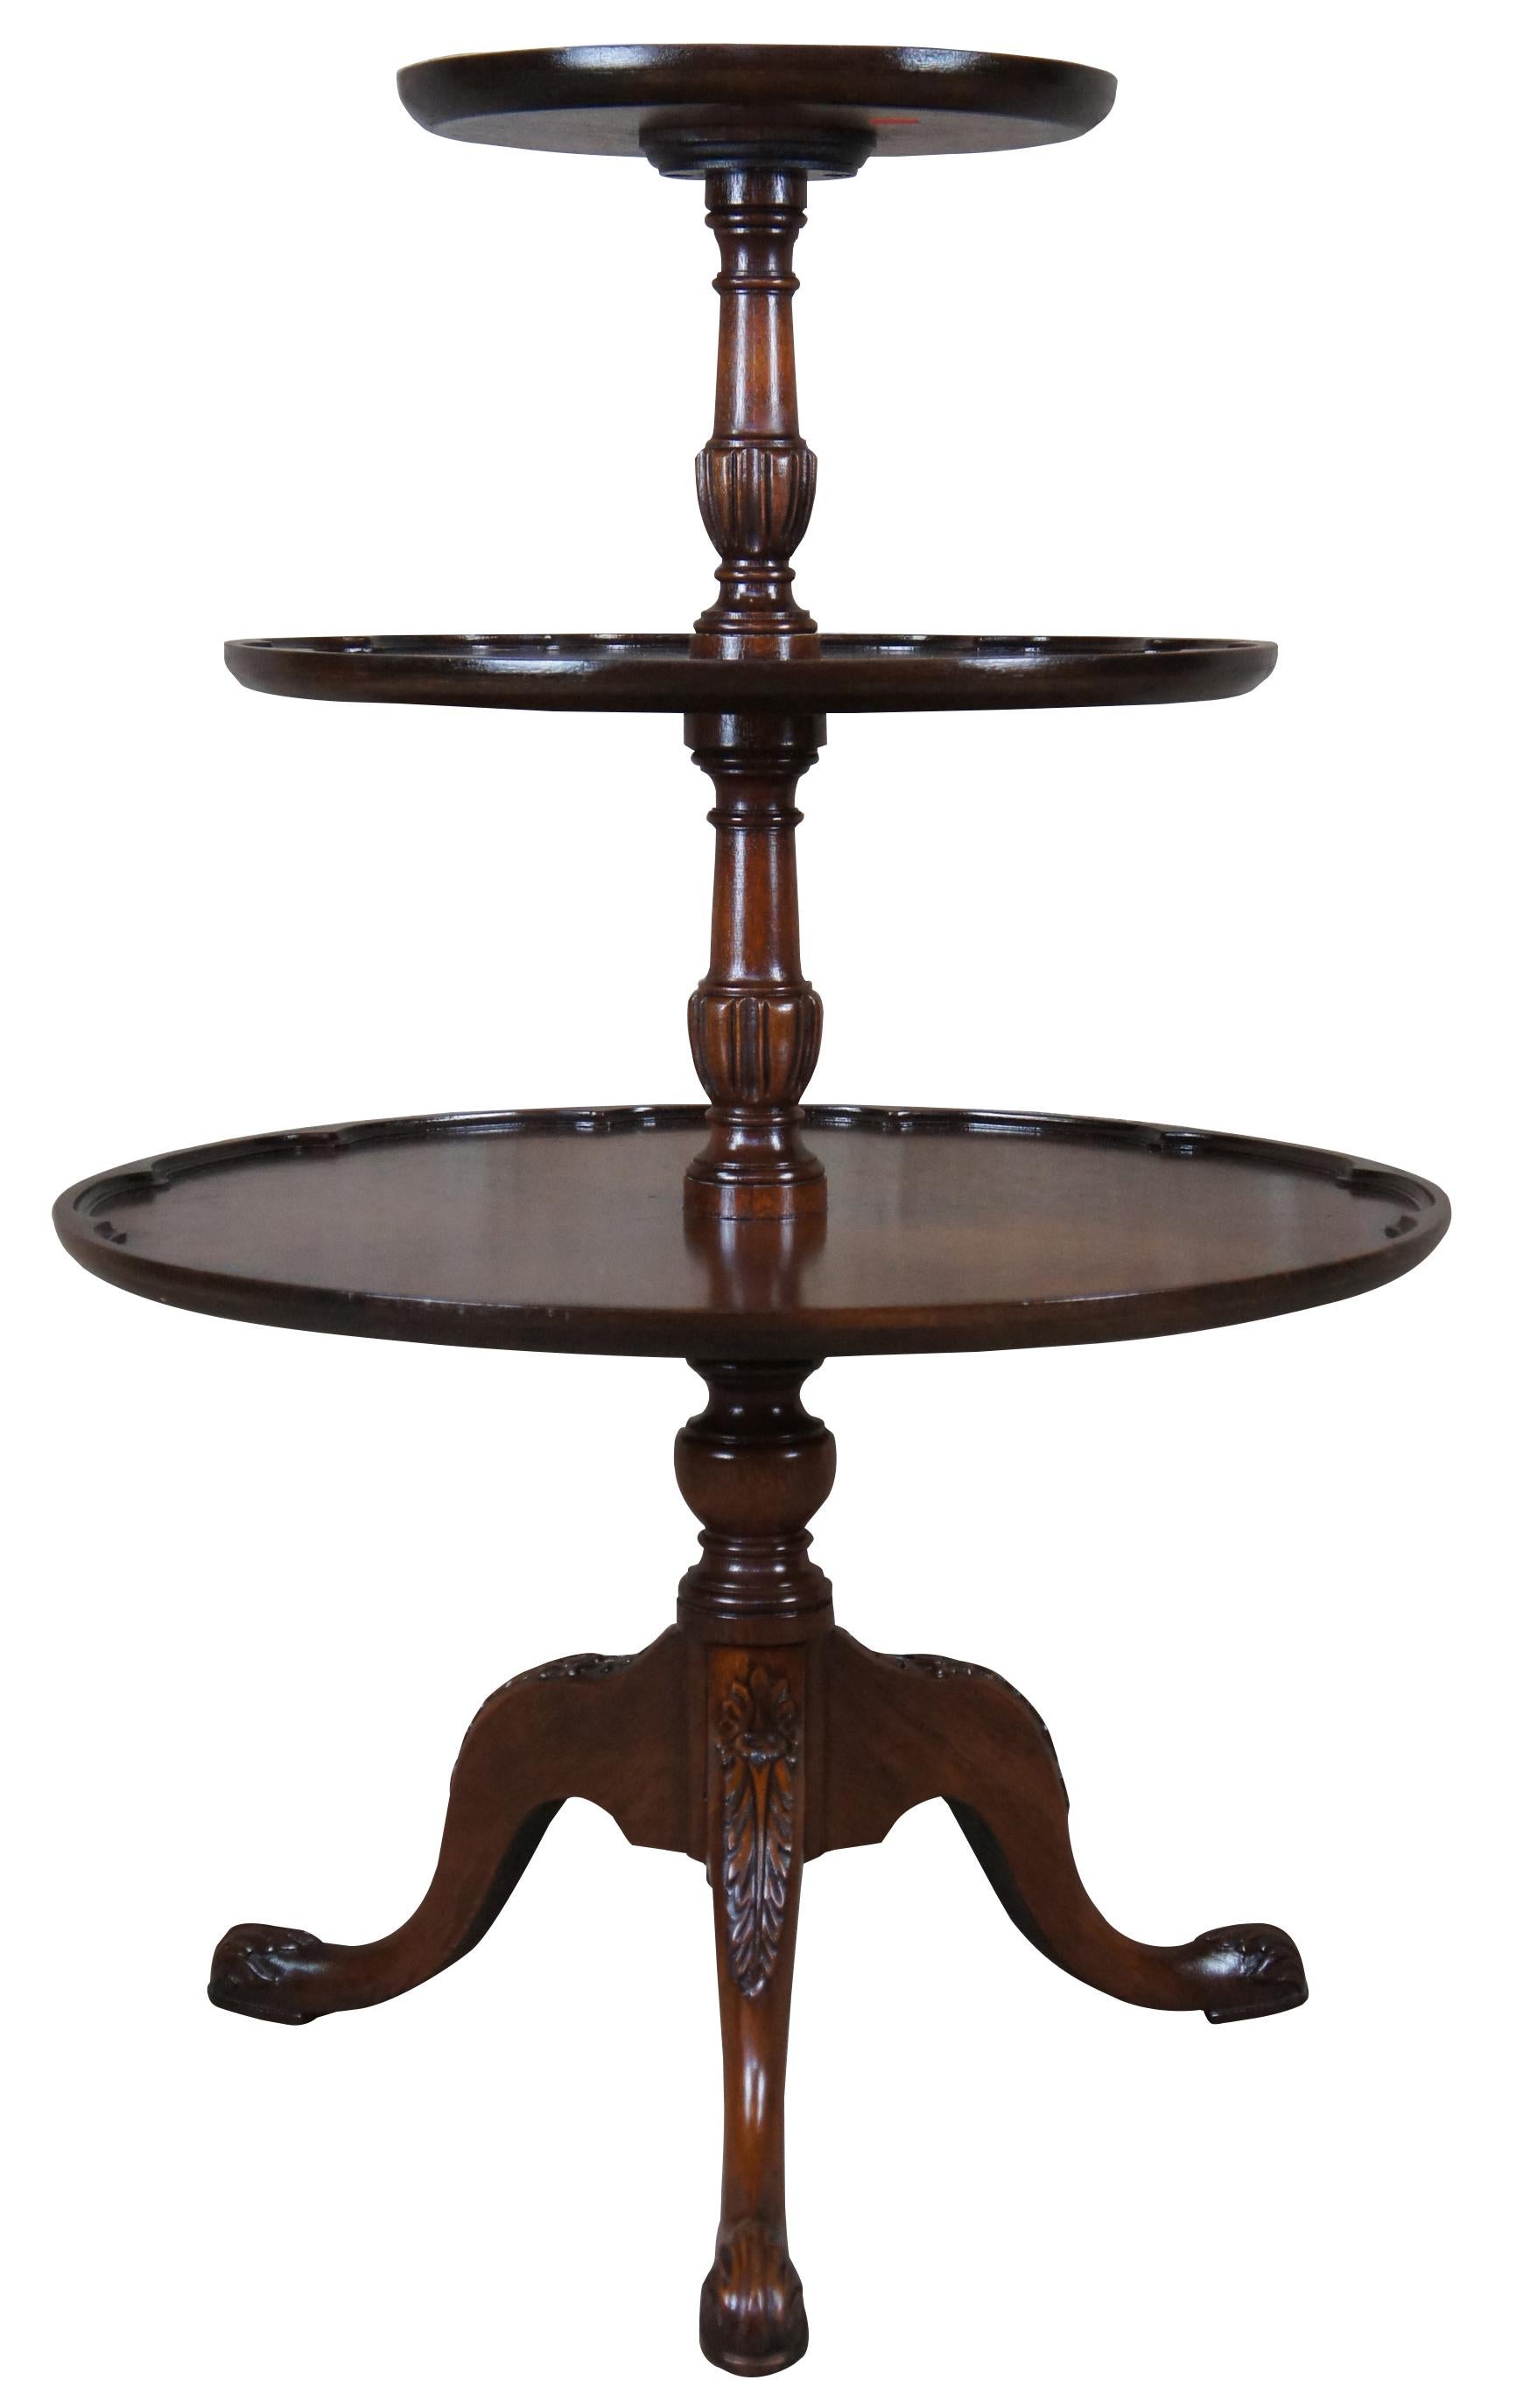 Vintage three tiered pie crust dumbwaiter or butlers table. Made of mahogany featuring chippendale styping with inset scalloped gallery on each tier and tripod base with acanthus accents.
    